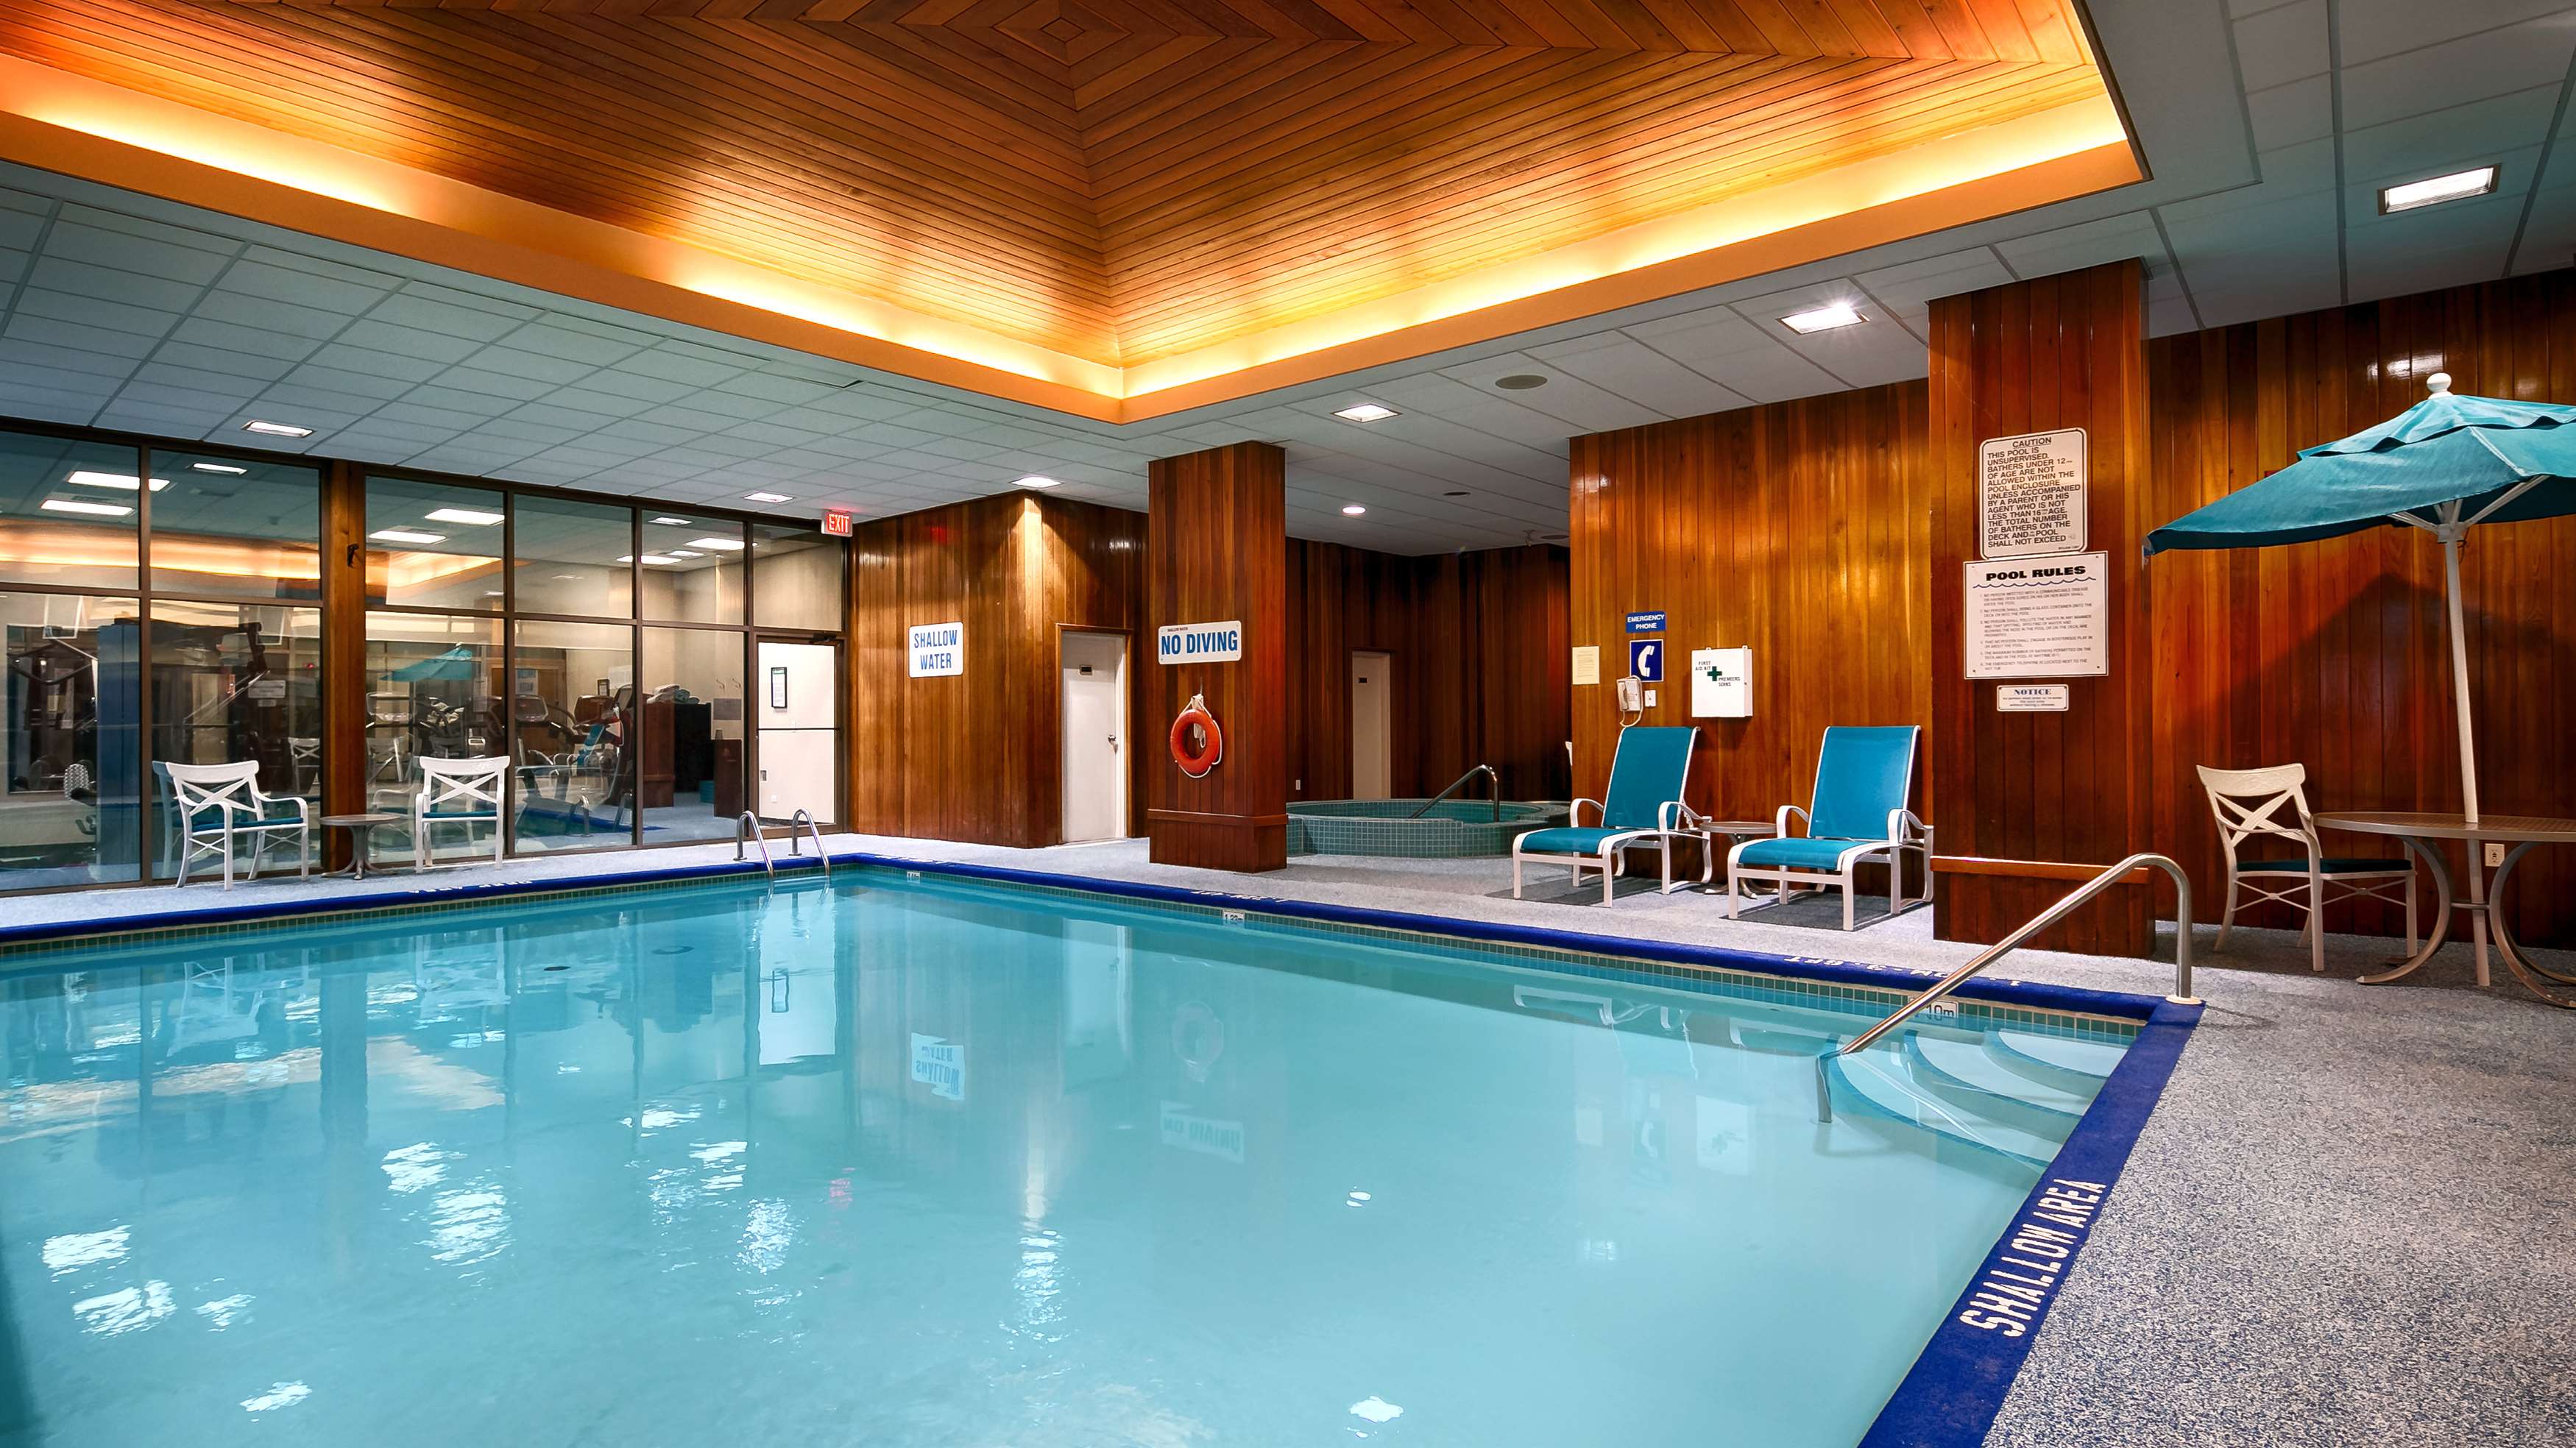 Indoor Heated Swimming Pool Best Western Plus The Arden Park Hotel Stratford (519)275-2936